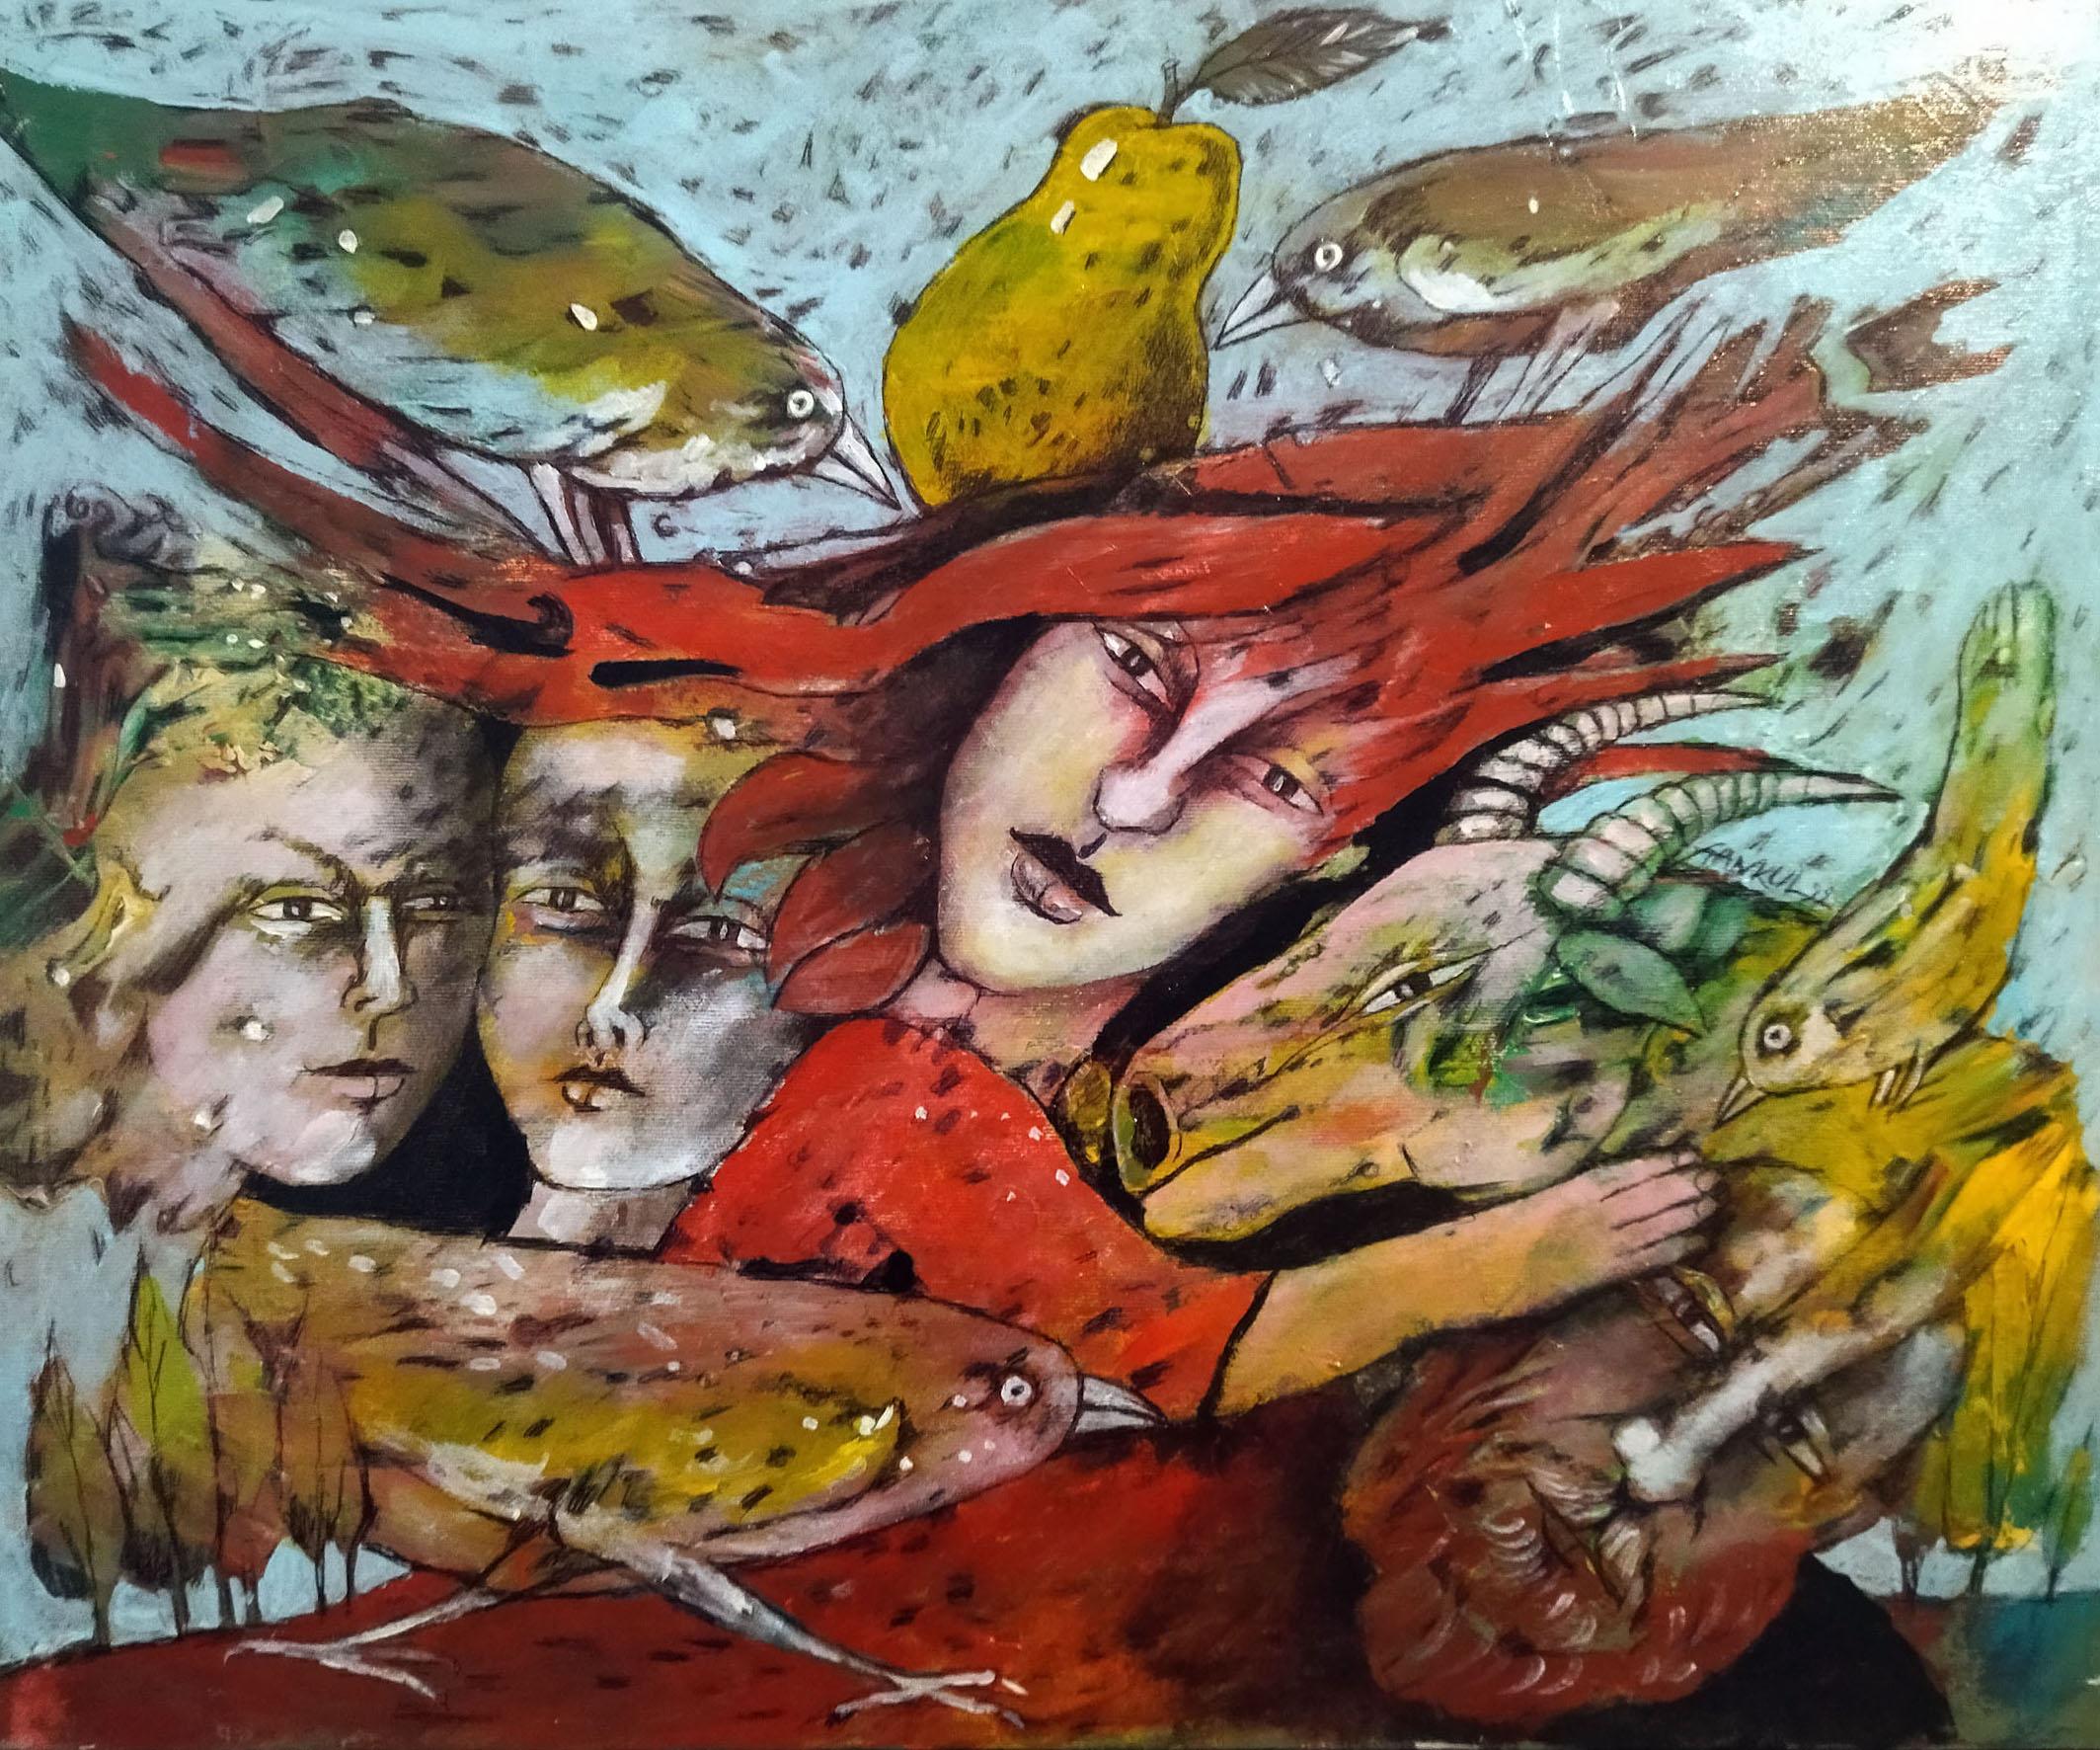 "Wilds" is a modern, figurative, abstract art line painting by Maestro Anatoliy Stankulov

The painting is unframed.

The vivid colors of his paintings bring emotion happiness, love and energy, represented by the vast creative power of his